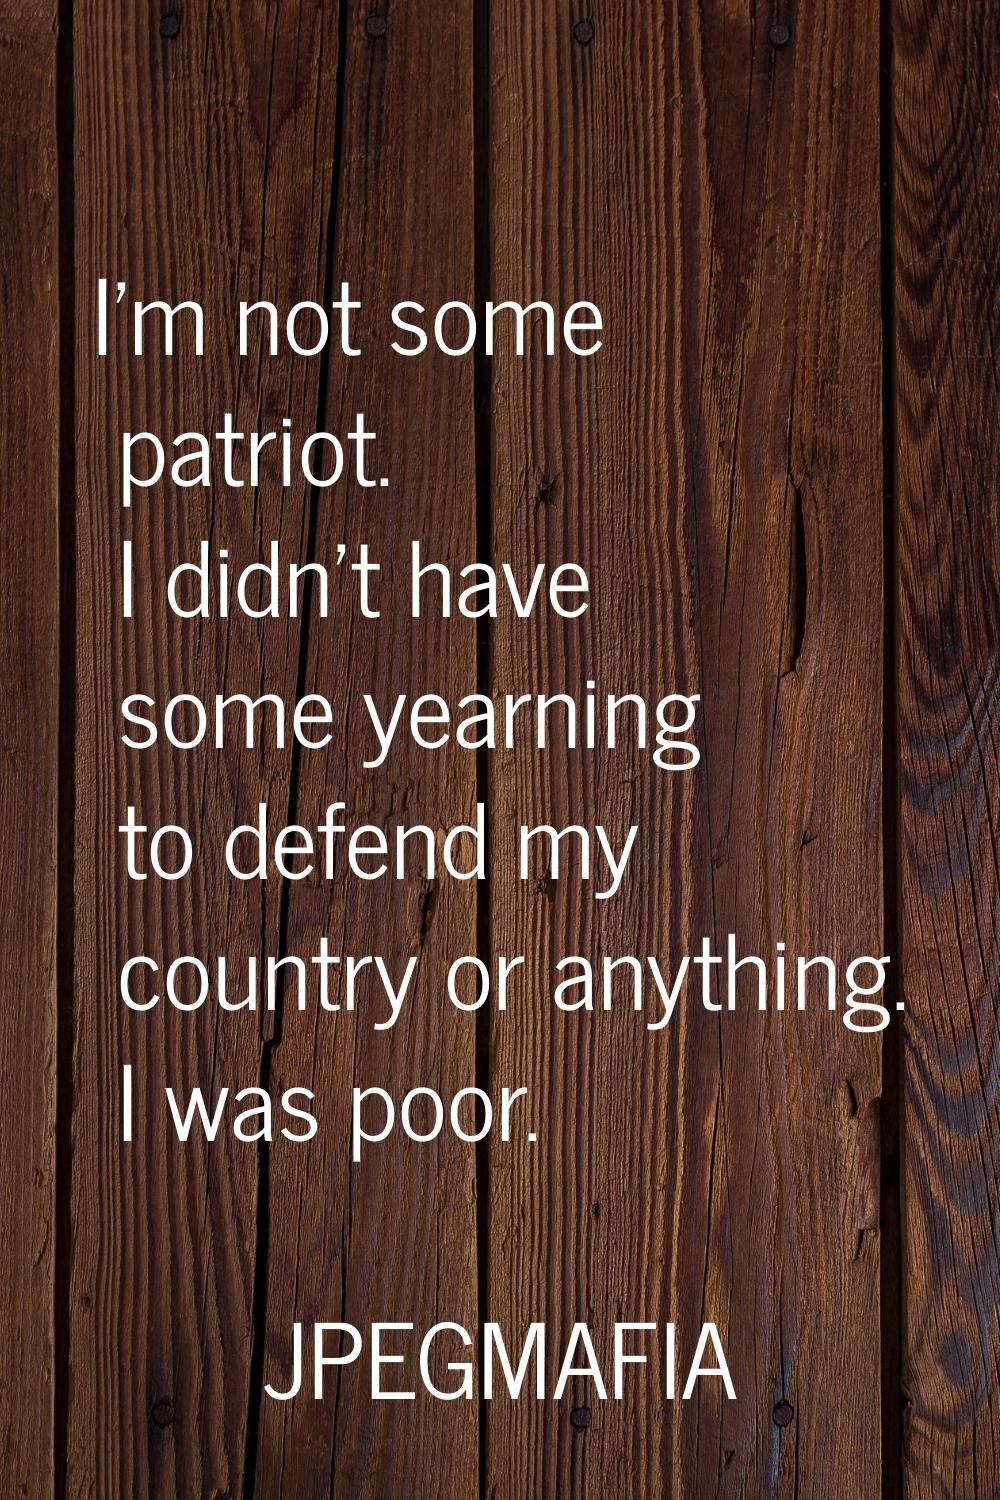 I'm not some patriot. I didn't have some yearning to defend my country or anything. I was poor.